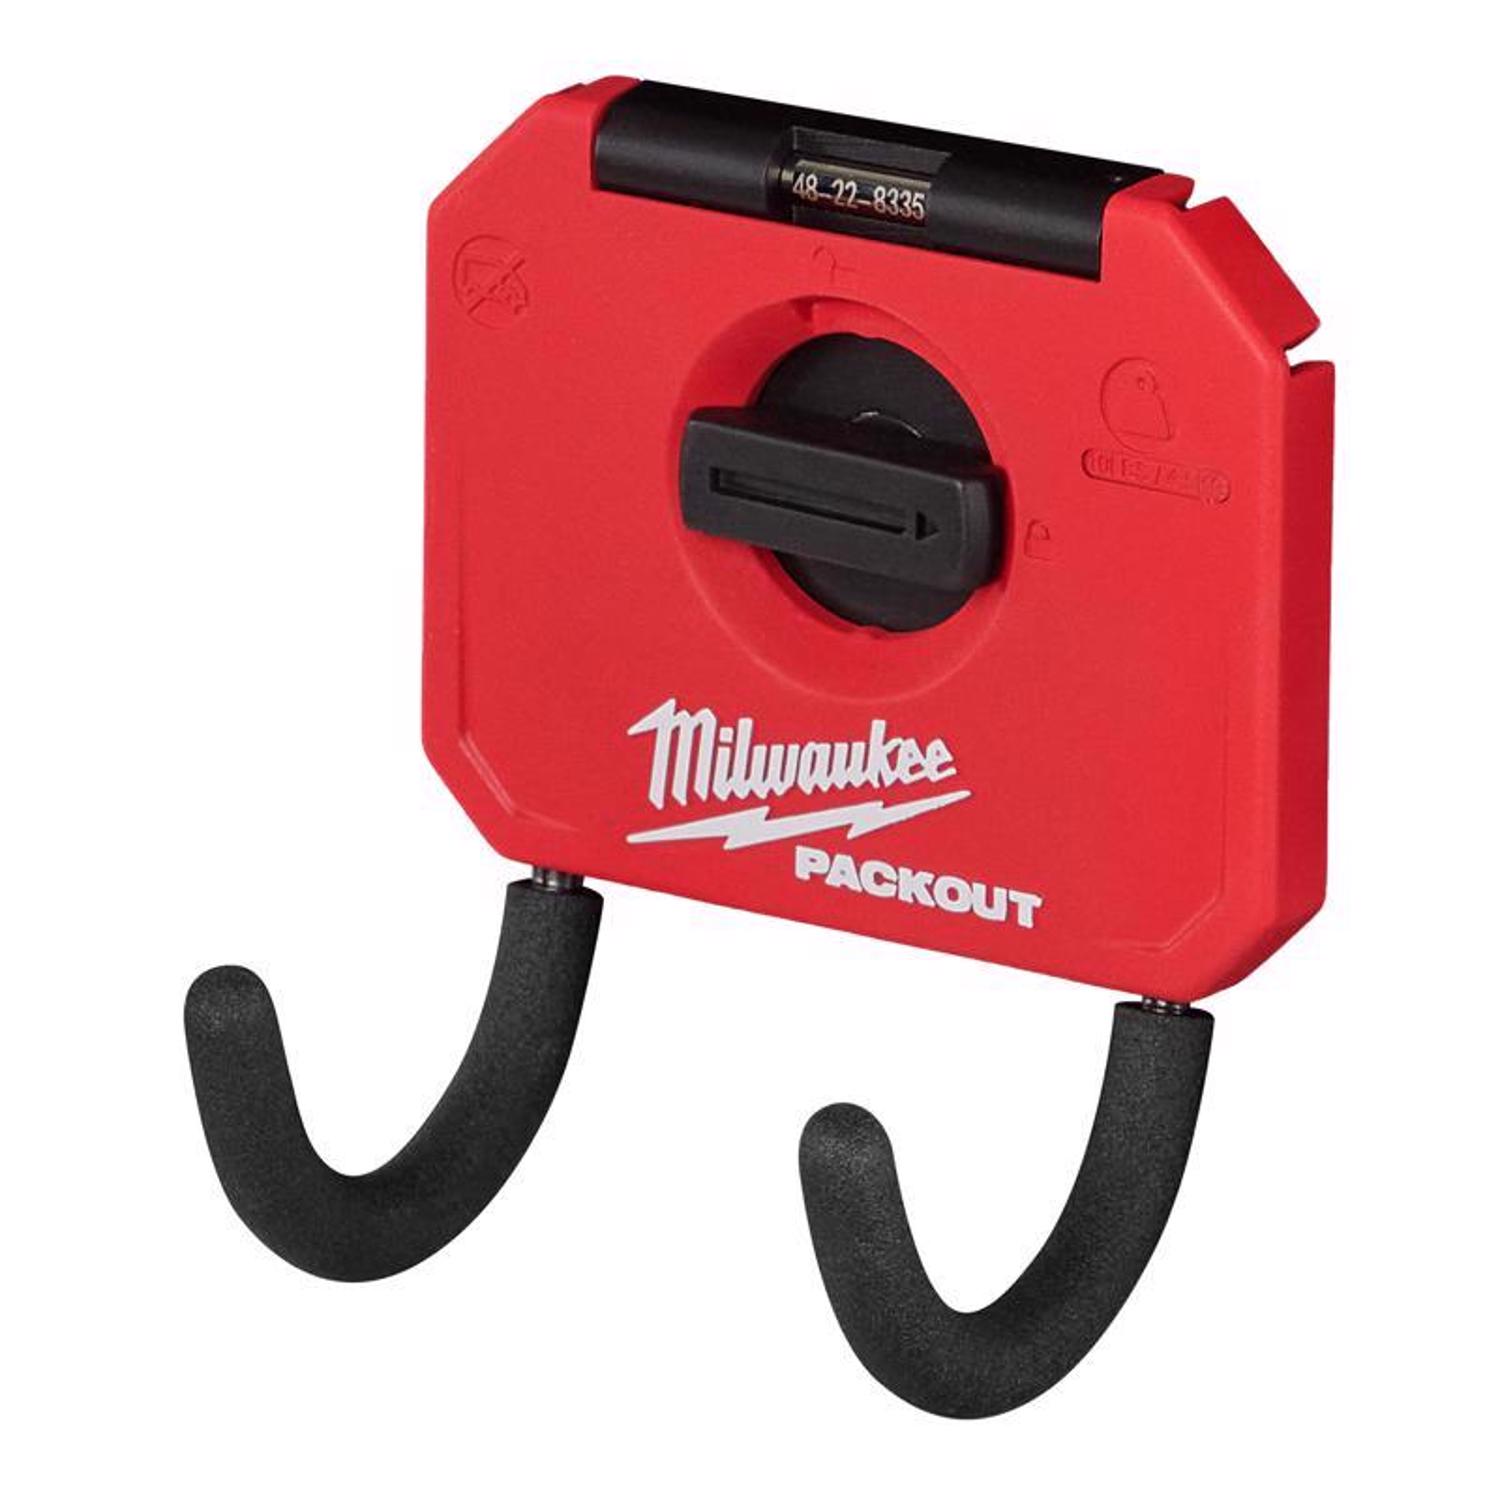 Photos - Tool Box Milwaukee Packout Small Black/Red Plastic 3 in. L Curved Hook 15 lb 1 pk 4 